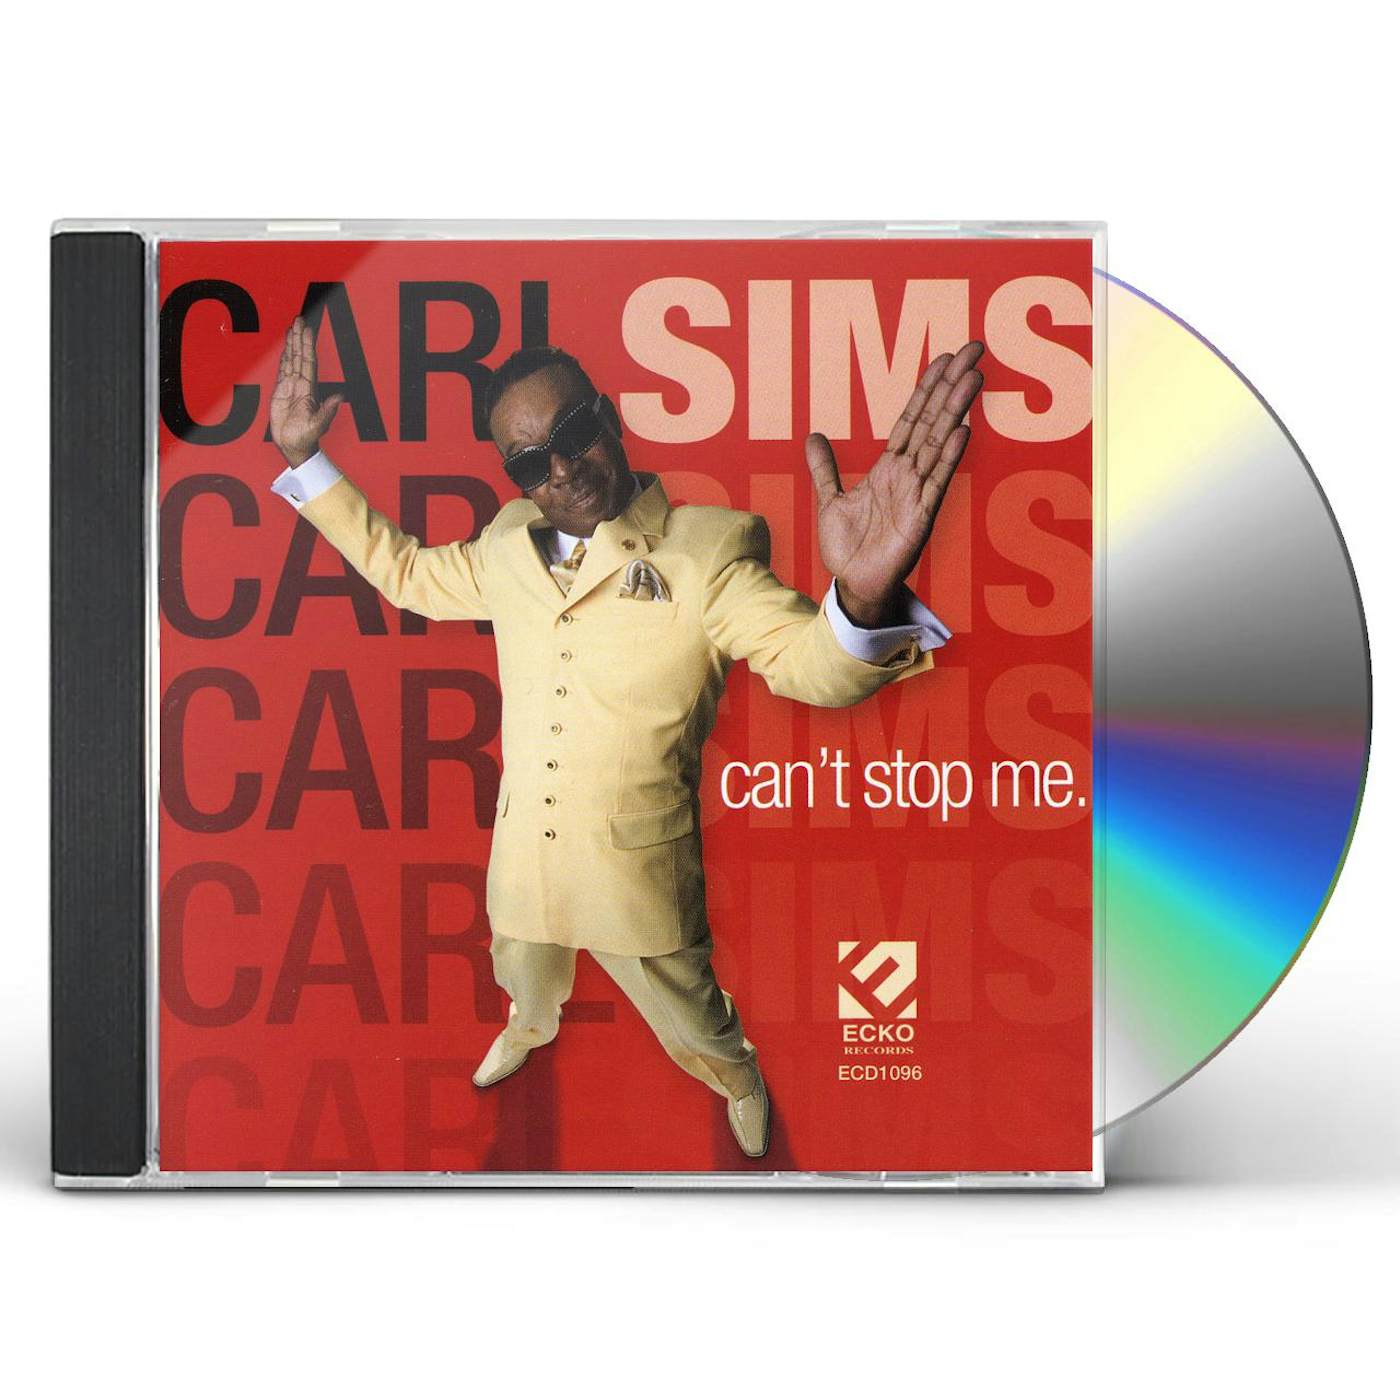 Carl Sims CAN'T STOP ME CD